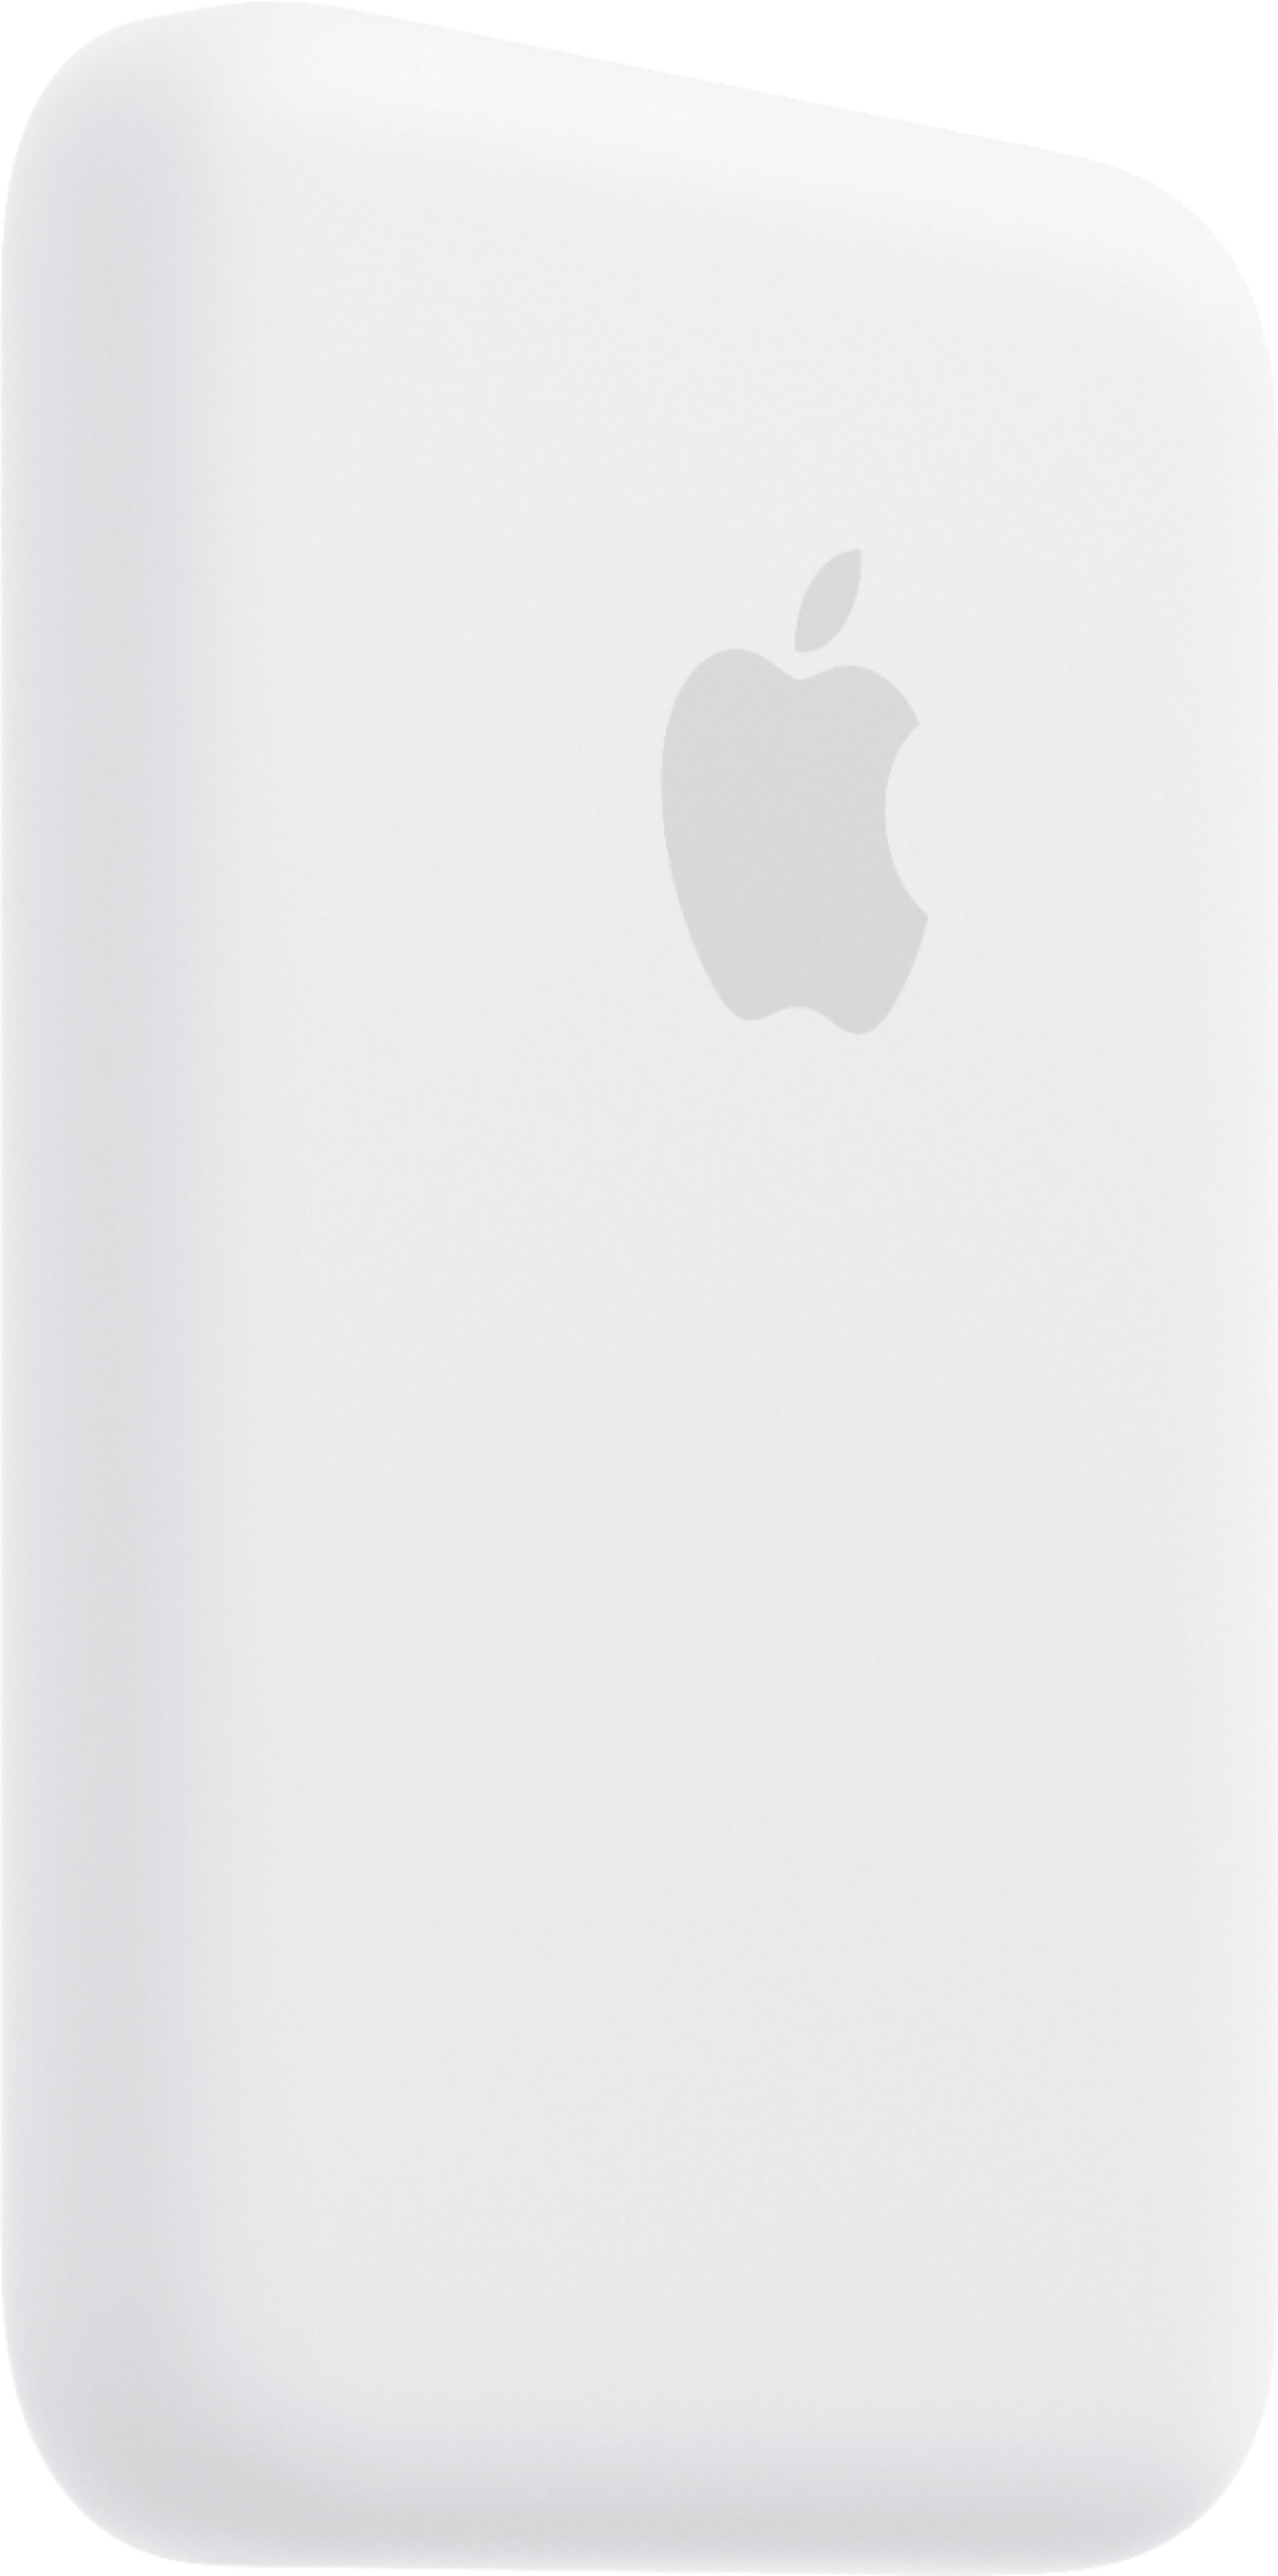 Apple MagSafe Battery Pack, Wireless Charging for MagSafe Devices - $74.24 at Verizon